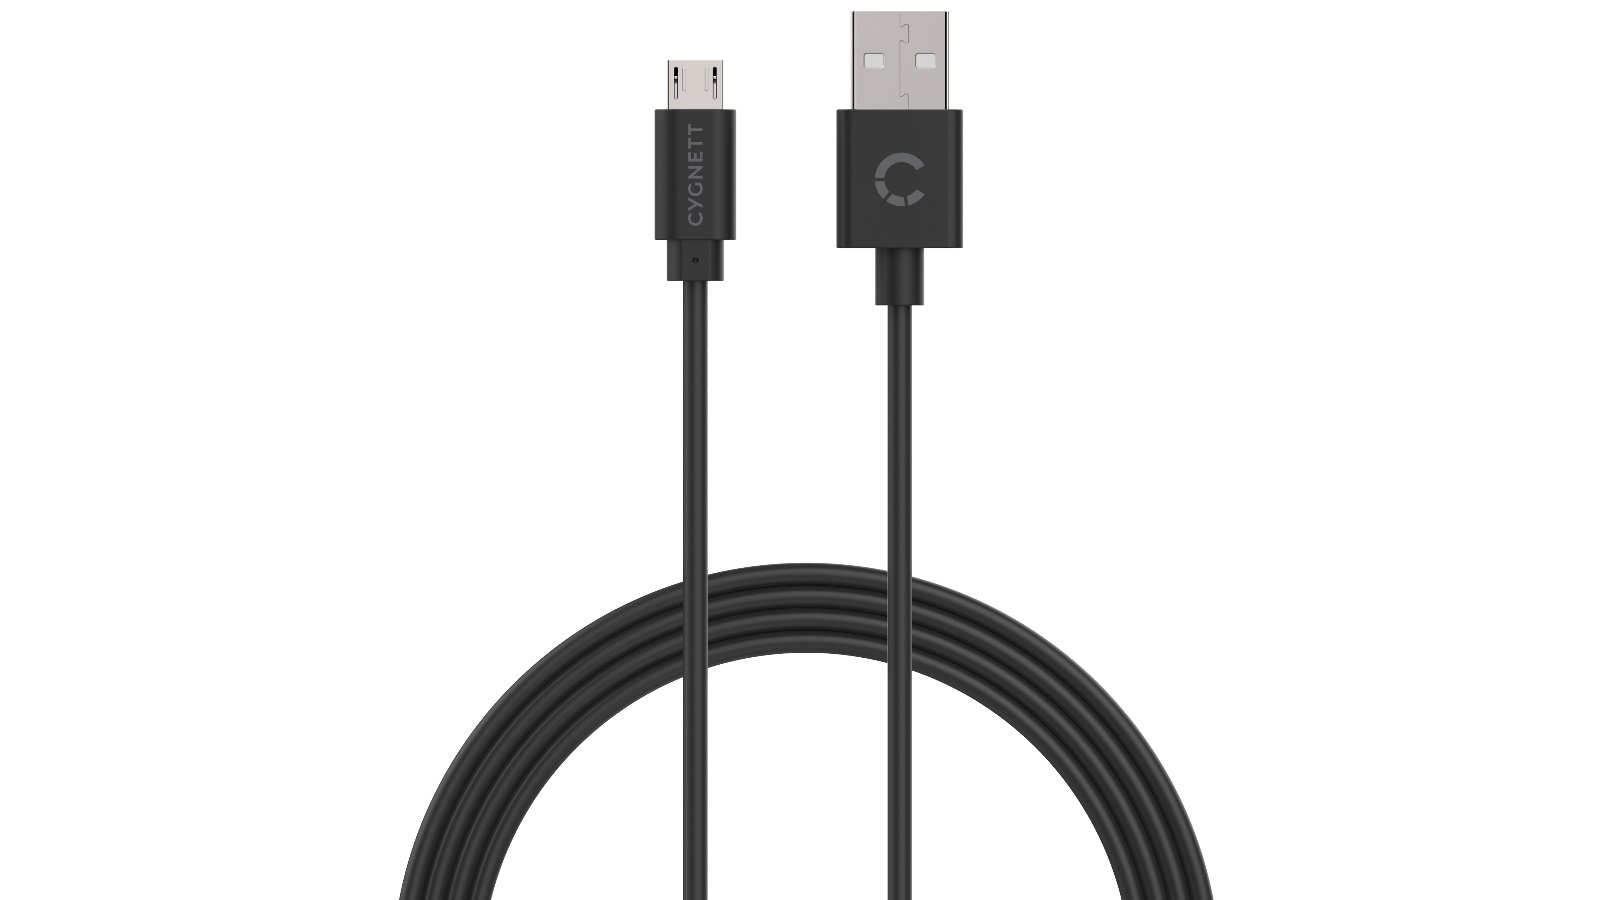 Comsol Premium Micro USB Charge and Sync Cable 3m Black